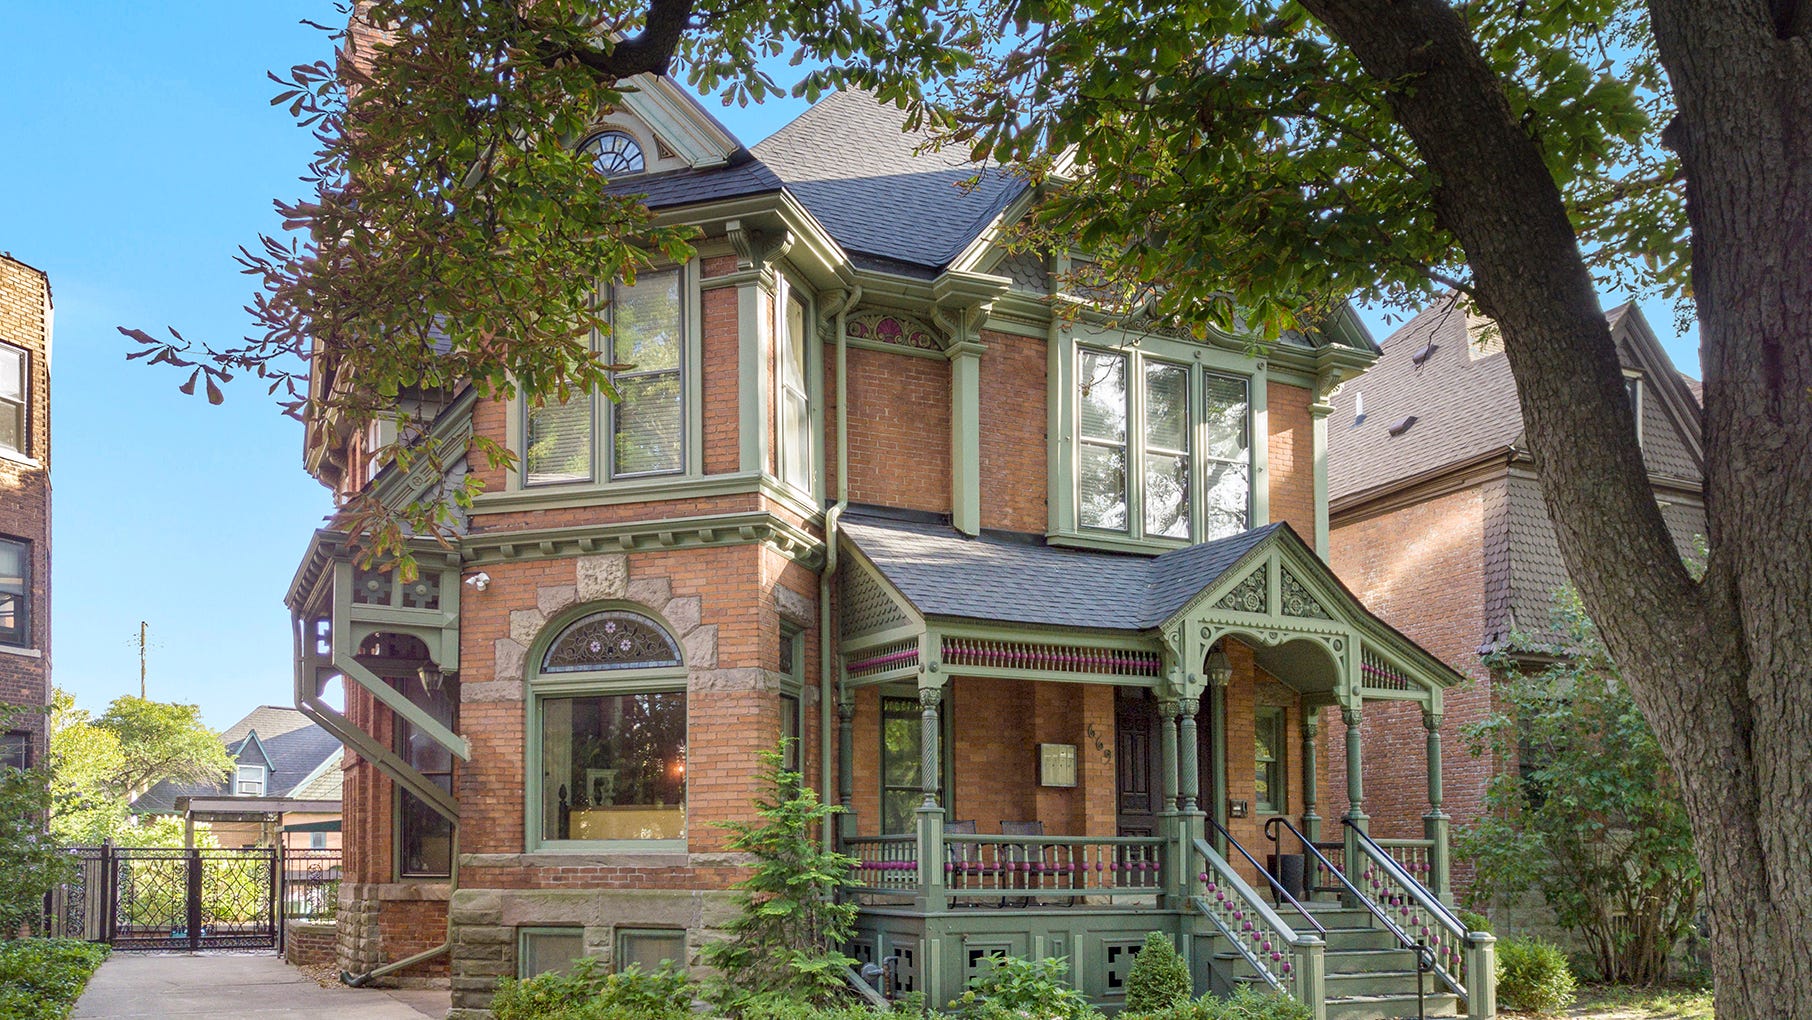 Canfield Historic District home is one of few to reach the open market